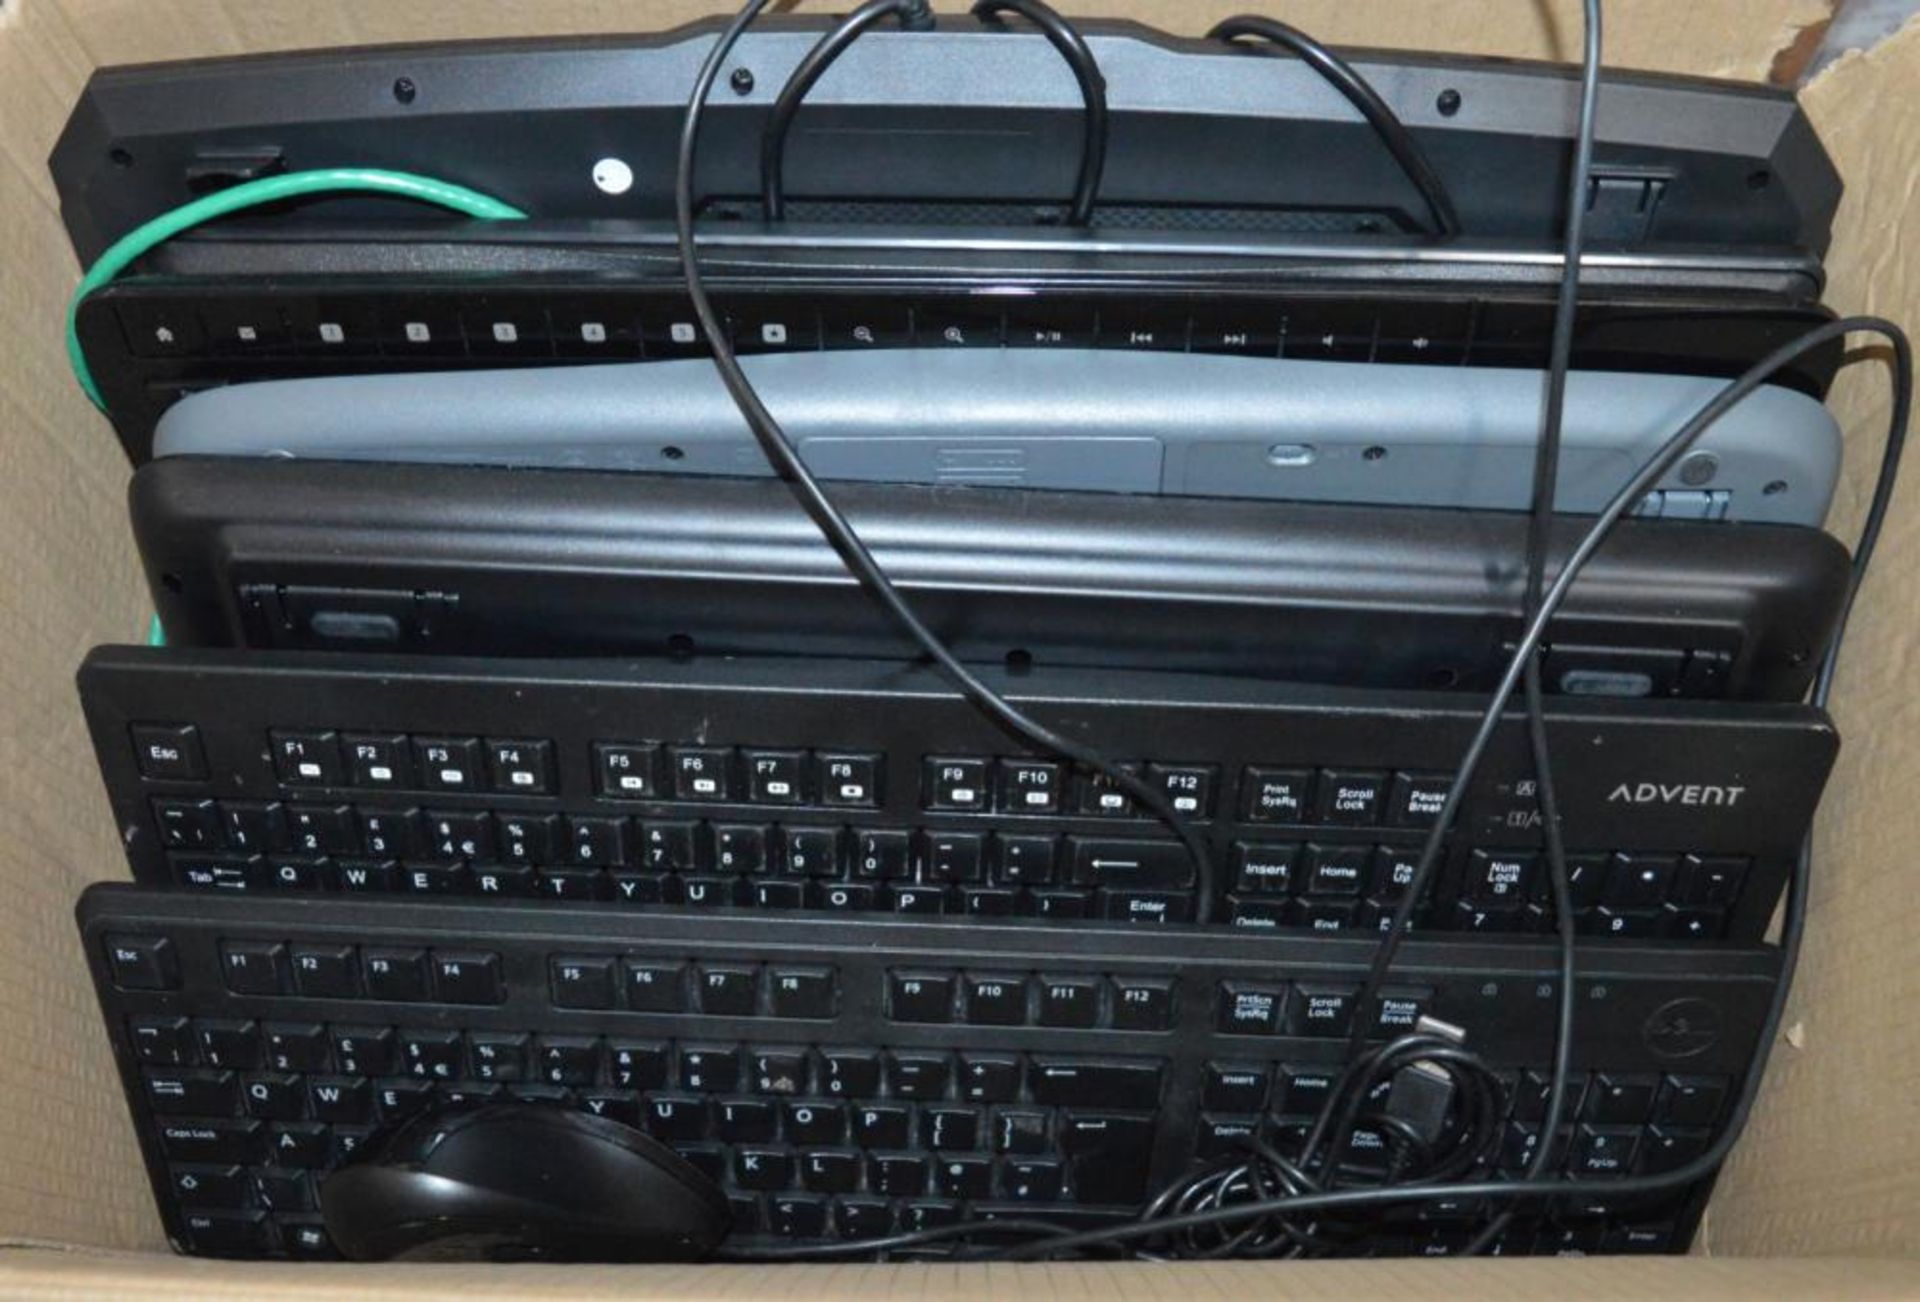 1 x Assorted Lot of Keyboards and Mice - Lot to Include 12 x Keyboards, 6 x Mice and Various Network - Image 7 of 8